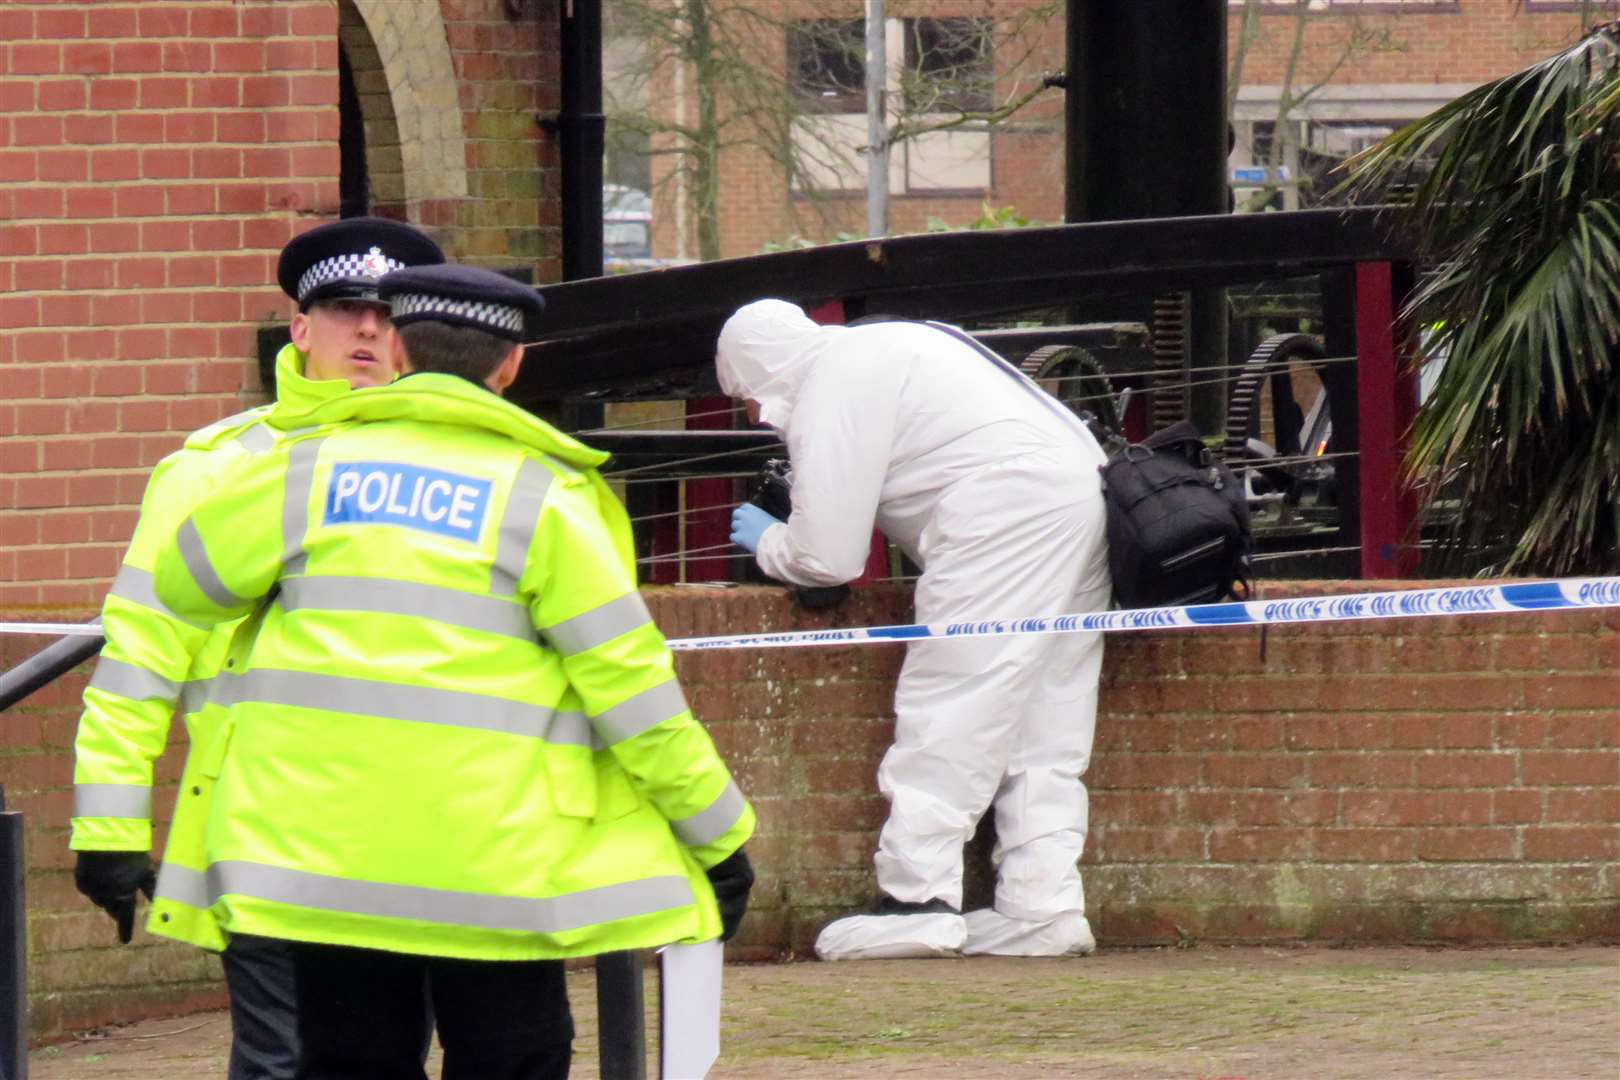 Forensics were called to the scene following the discovery of the body